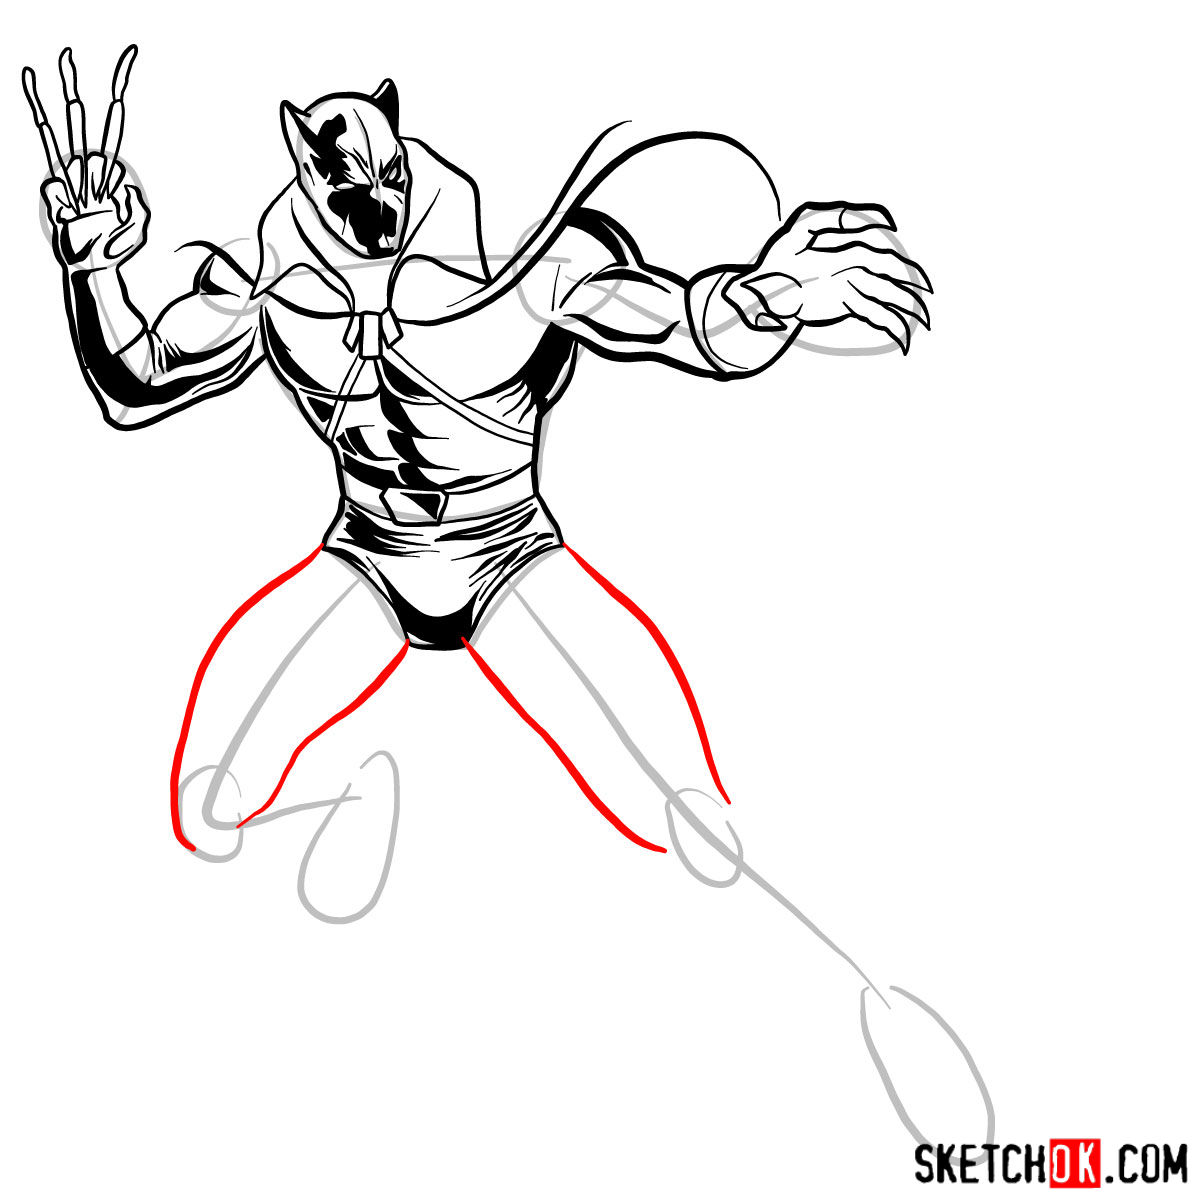 How to draw Black Panther superhero in battle rack - step 09